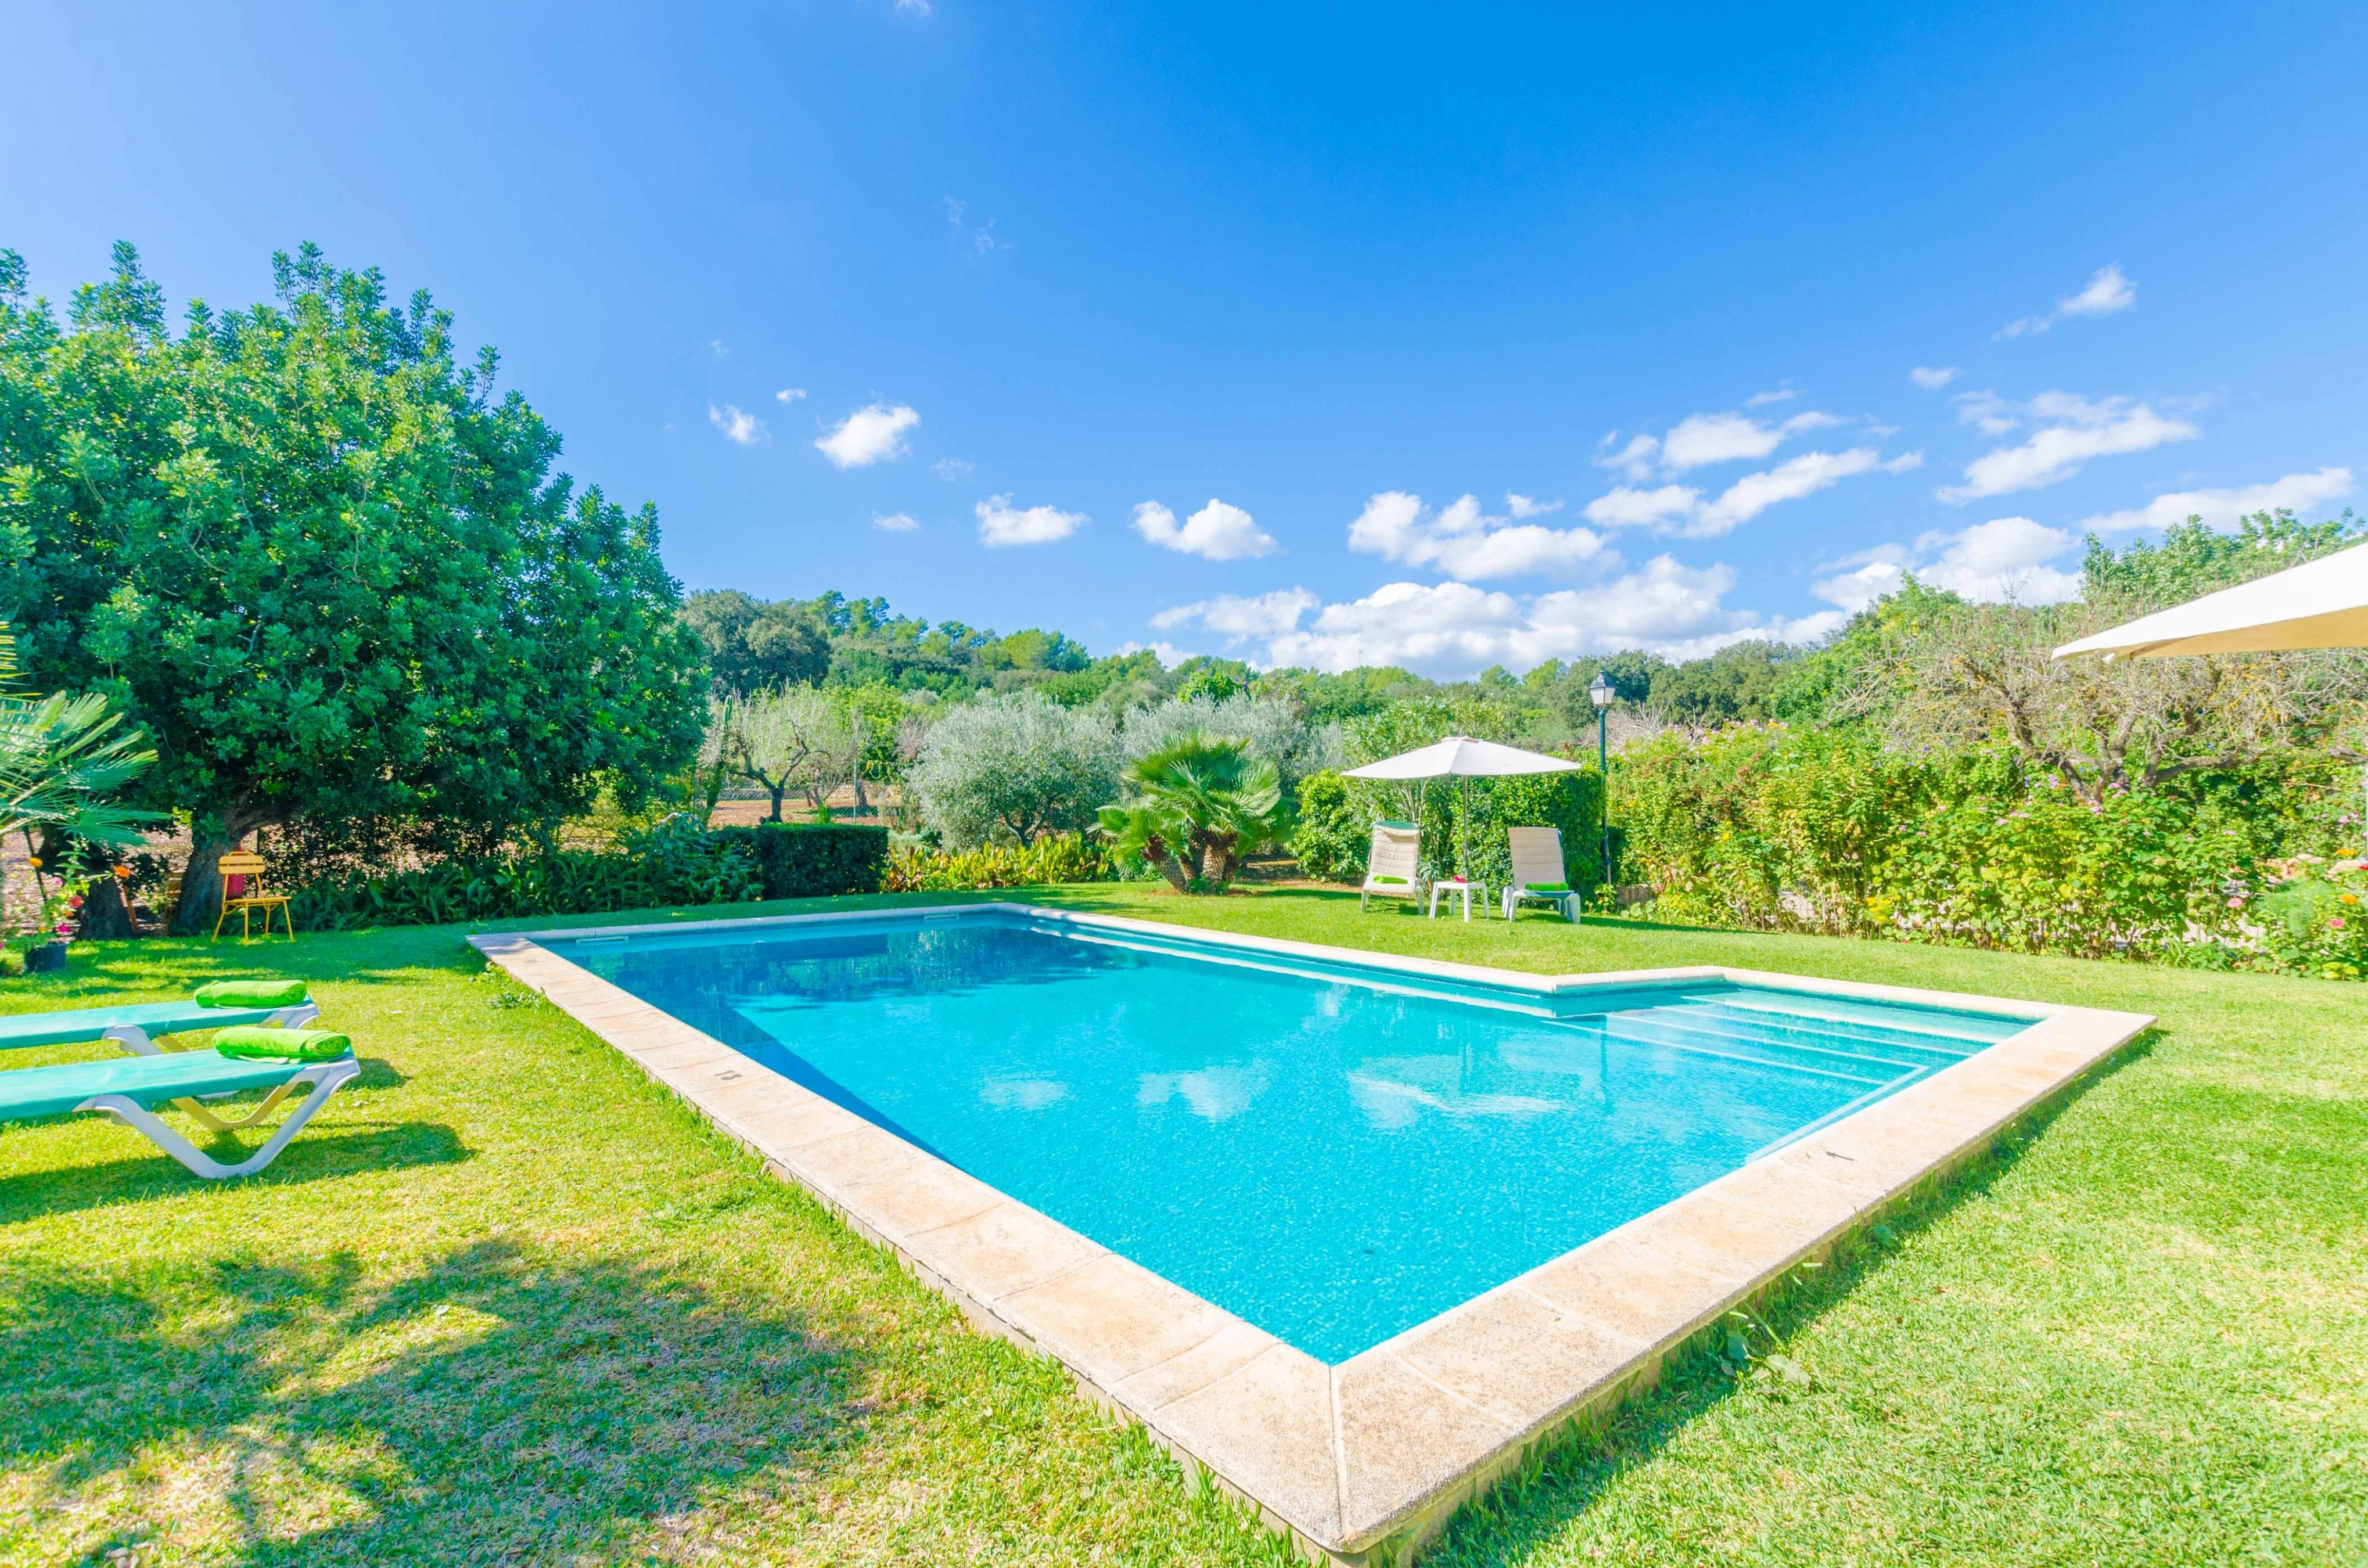 Property Image 2 - SA MATA - Spectacular Majorcan finca with private pool enclosed by the trees and greenery around.